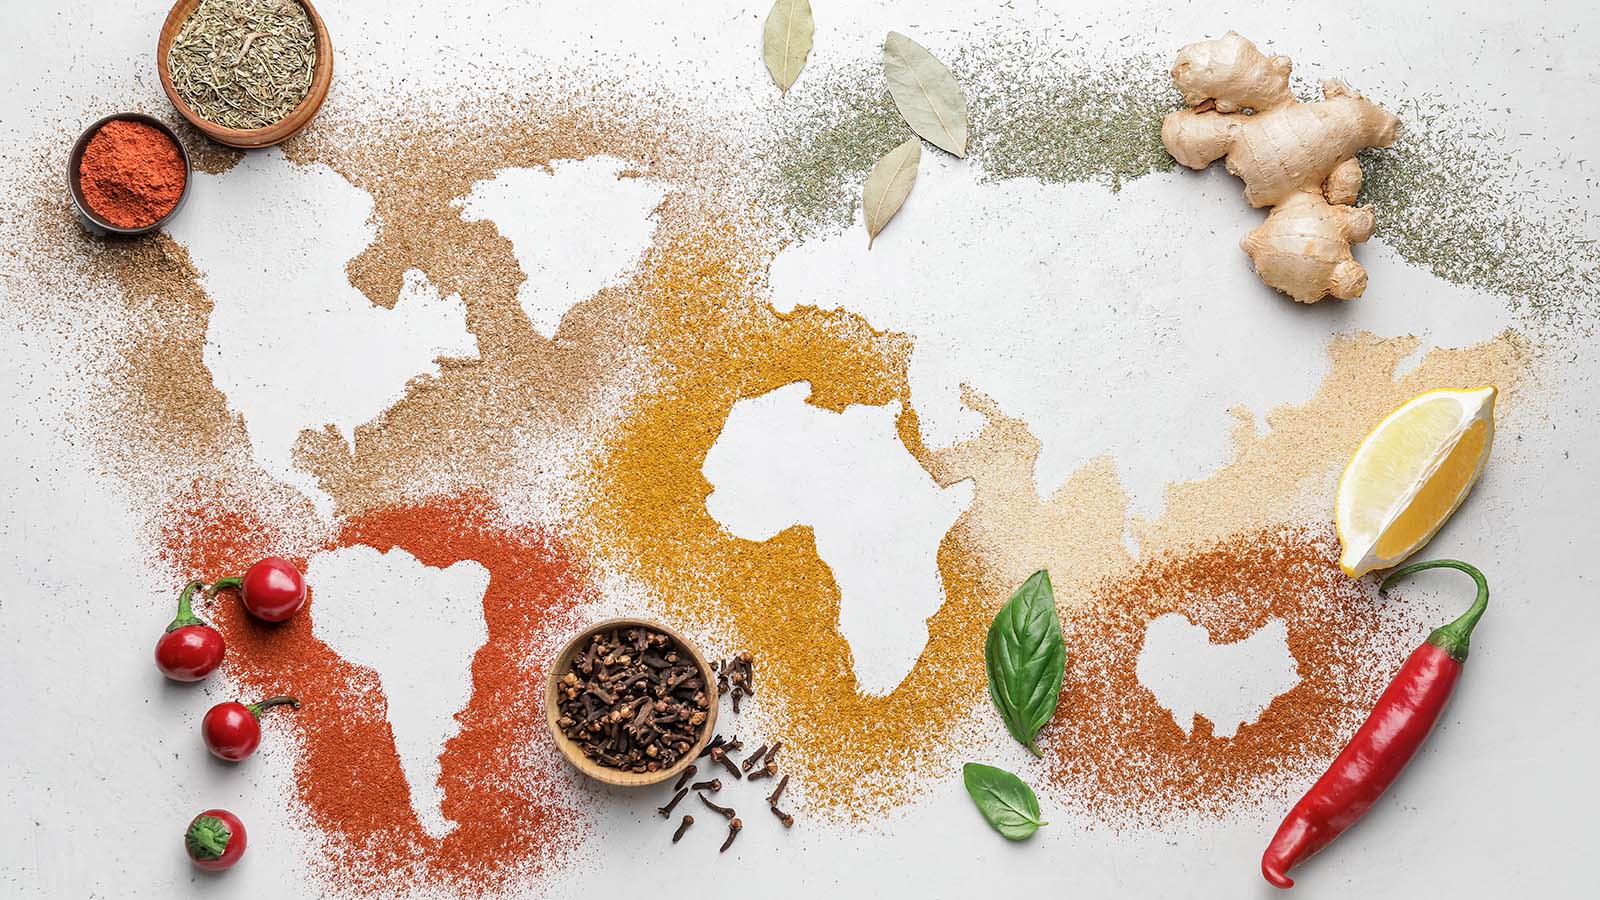 World map made up of different spices